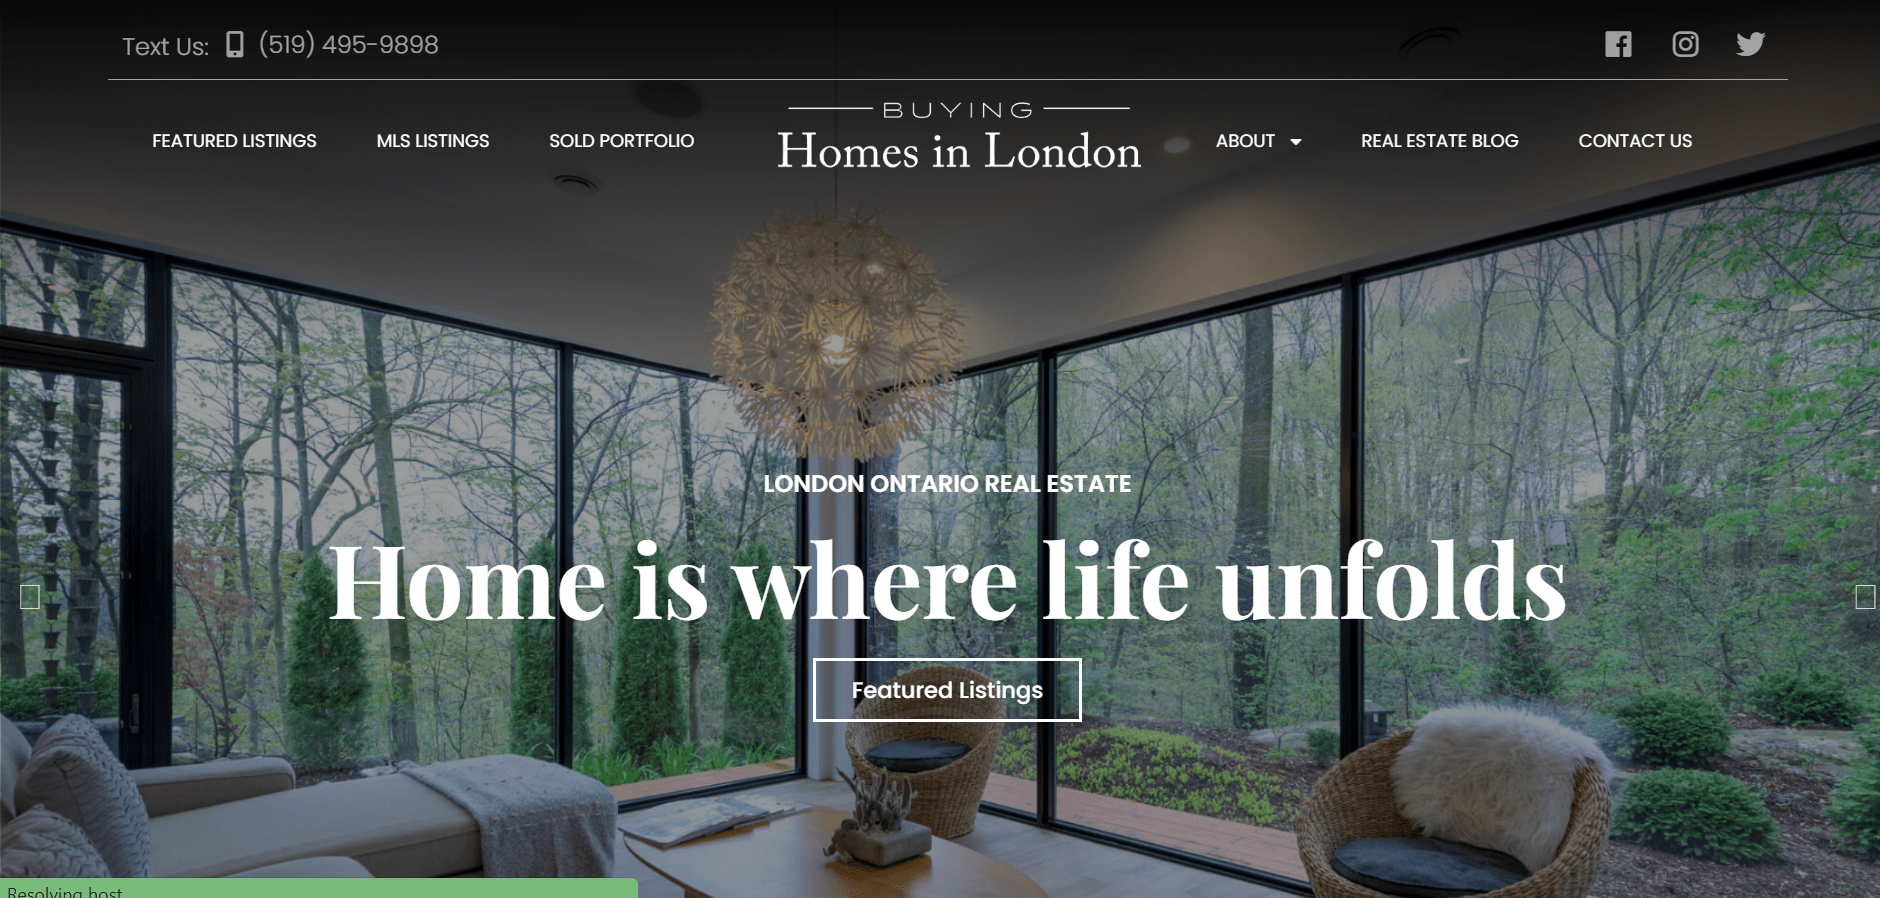 Landing page of Buying Homes In London 